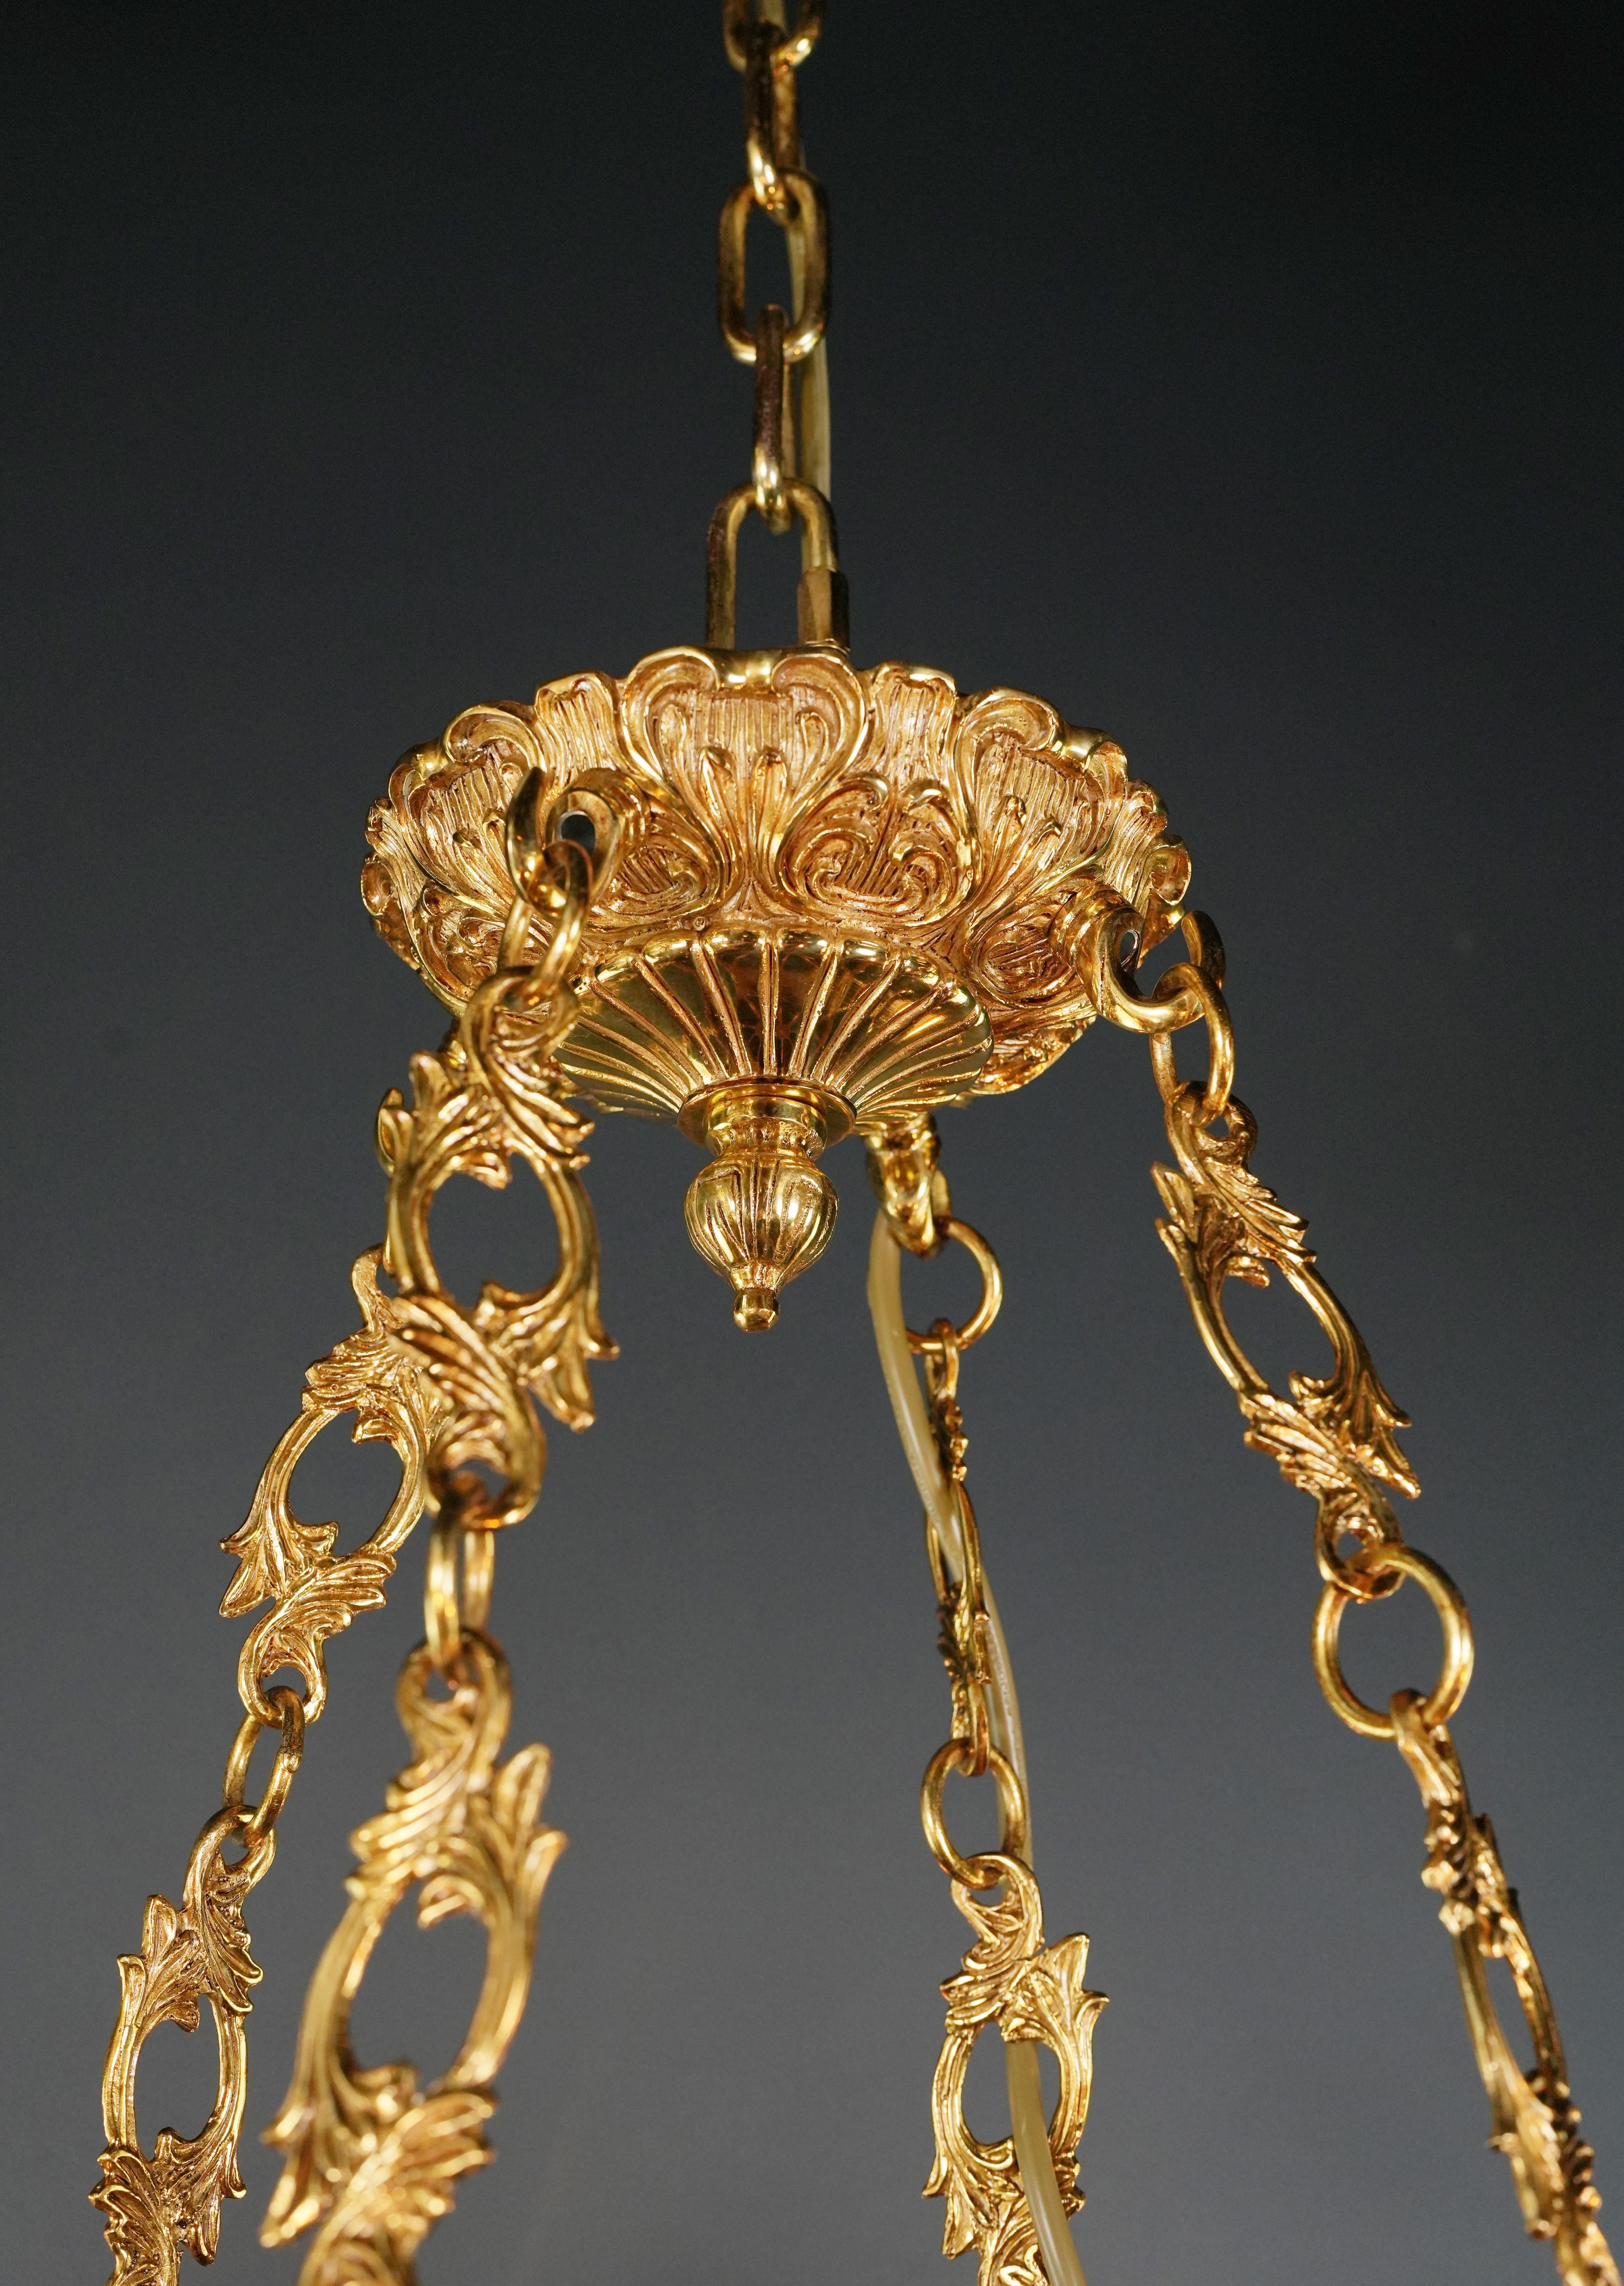 Peacock Bird French Brass Empire Chandelier Lustre Lamp Antique Gold Art Deco For Sale 3